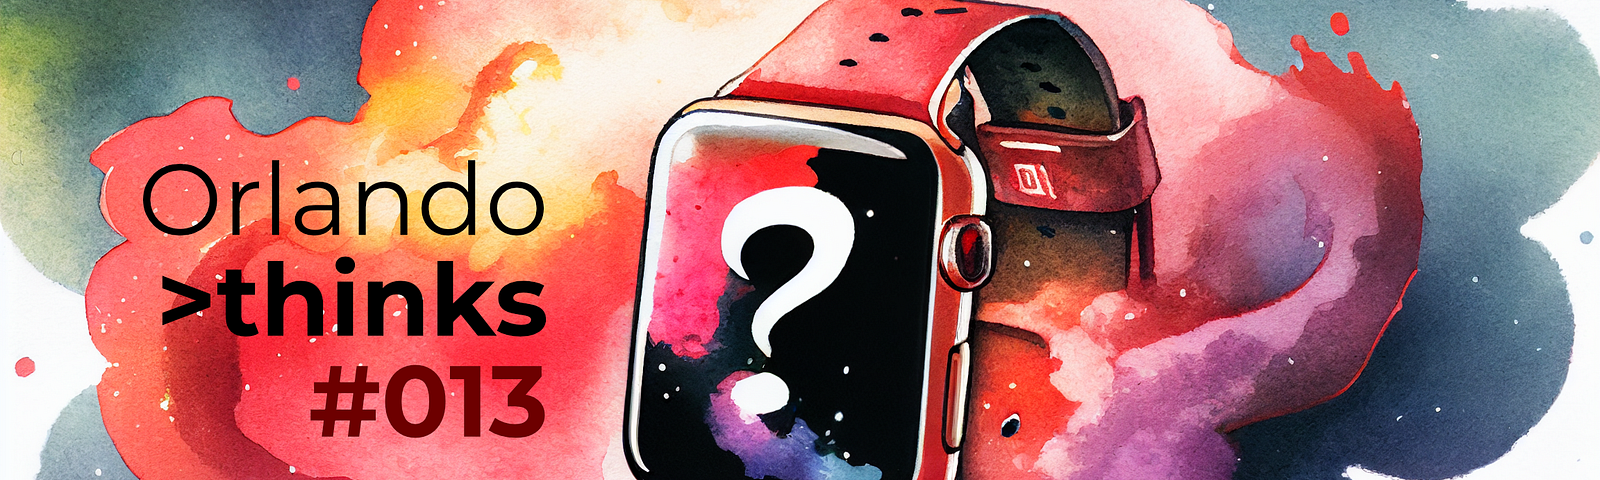 A waterpainted art image that shows an Apple Watch in red smoke with a question mark on the display. On the left of the watch is text “Orlando thinks #013”